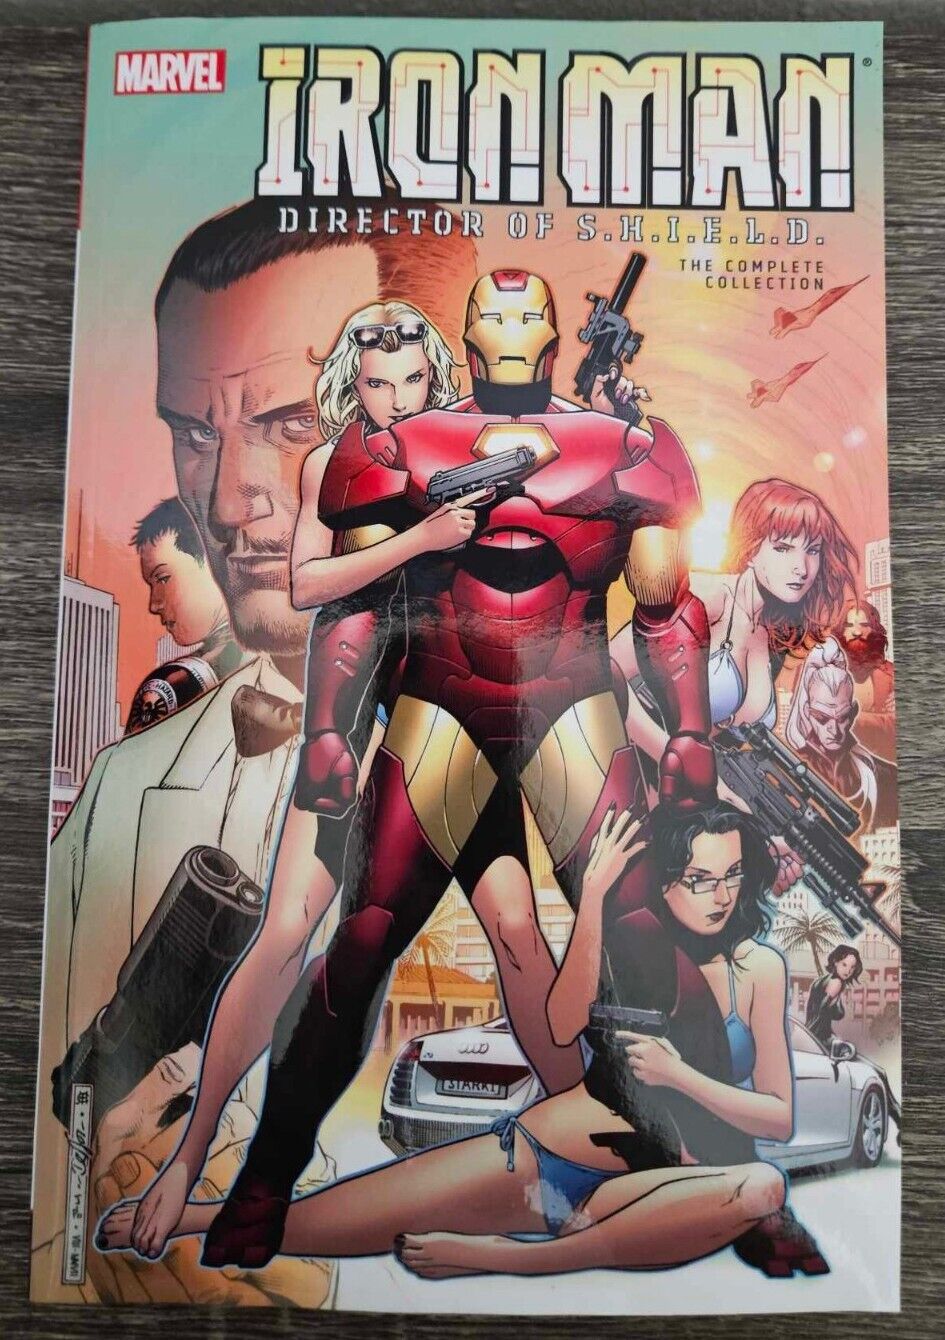 Iron Man: Director of S.H.I.E.L.D. - The Complete Collection (Marvel, 2017)